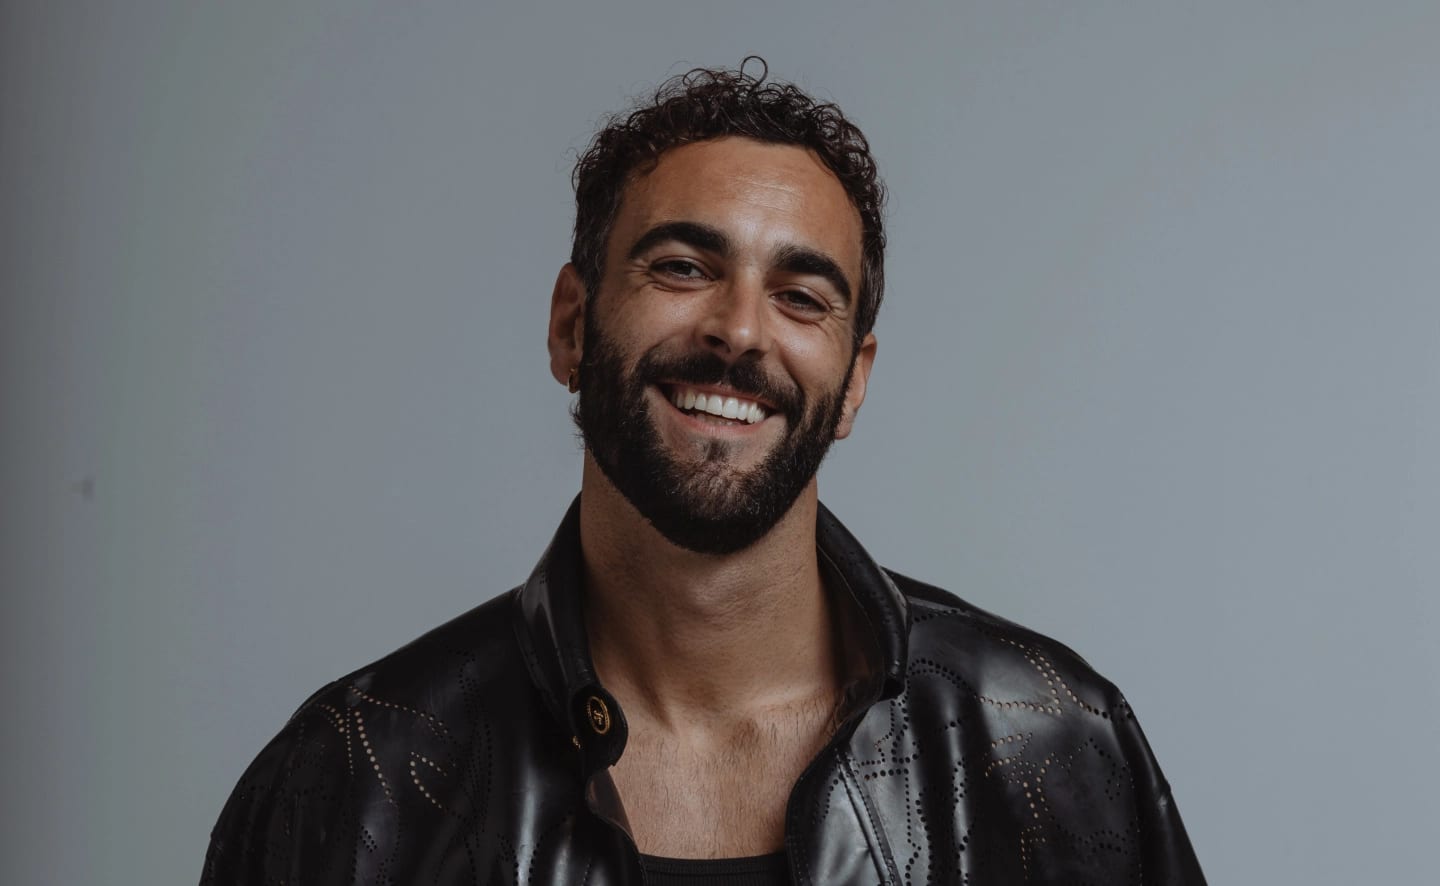 Italy: Marco Mengoni to sing revamped version of 'Due Vite' in Eurovision